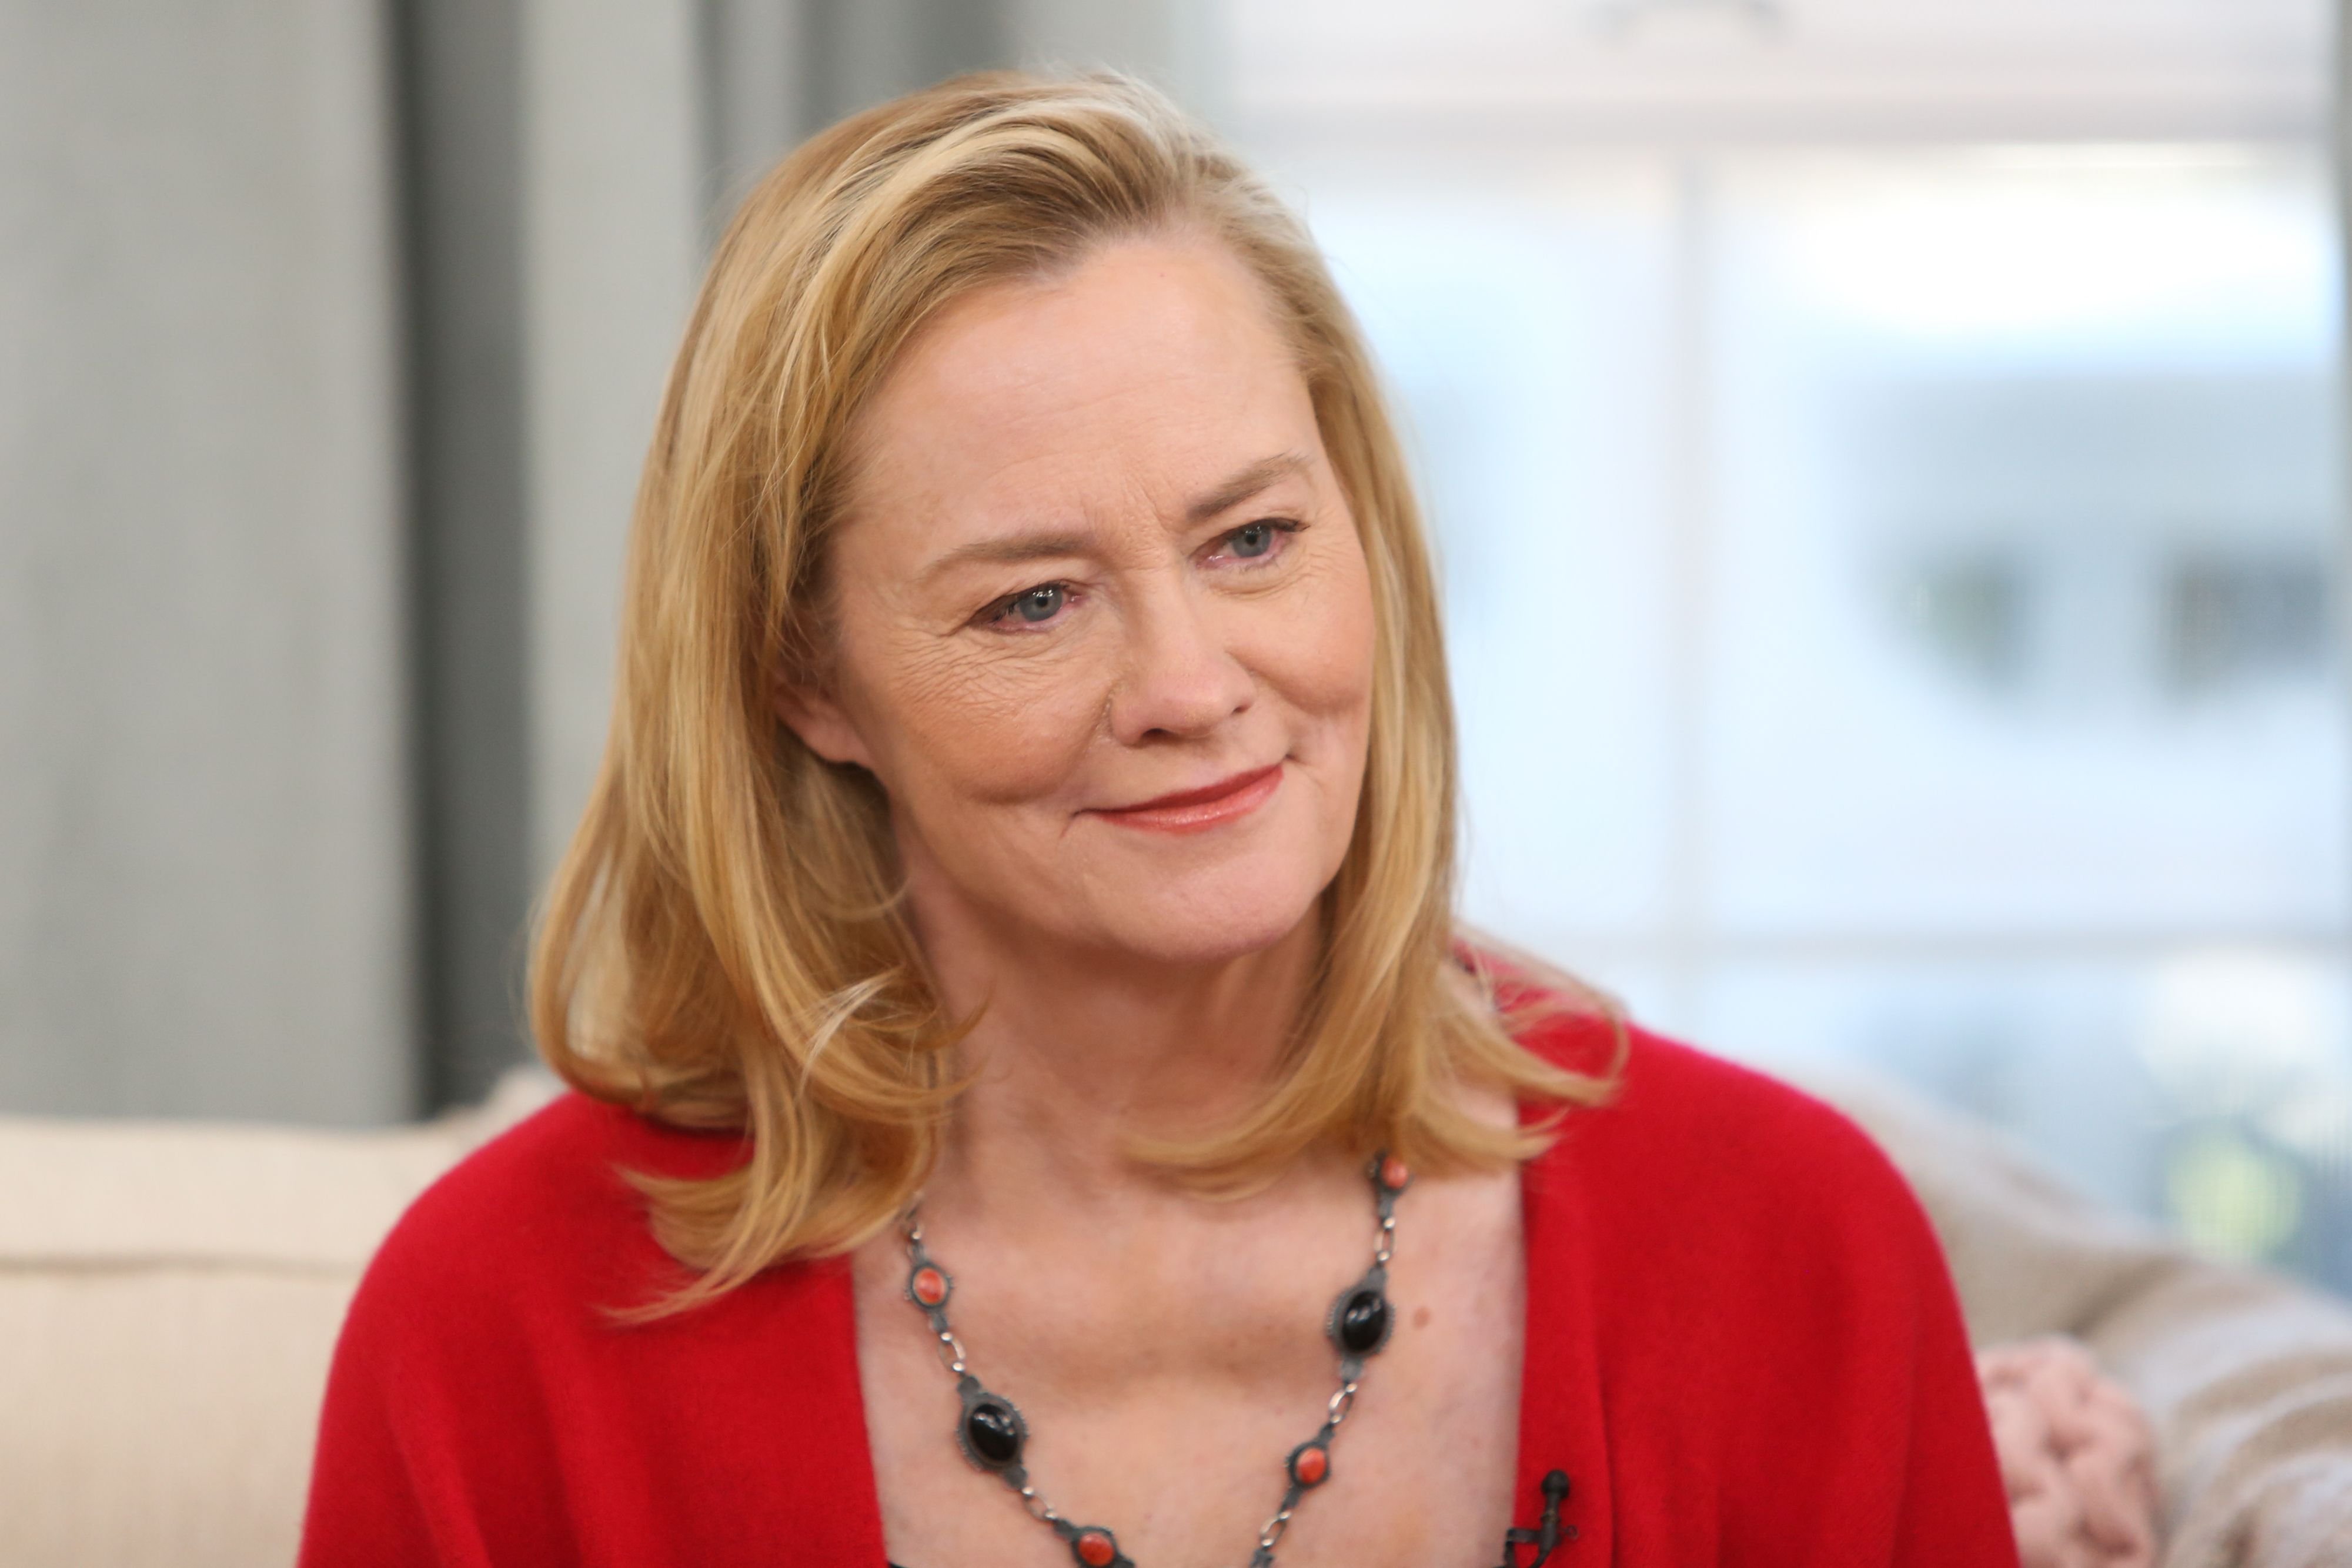 Cybill Shepherd at Hallmark's "Home & Family" at Universal Studios Hollywood on January 25, 2019 | Photo: Getty Images